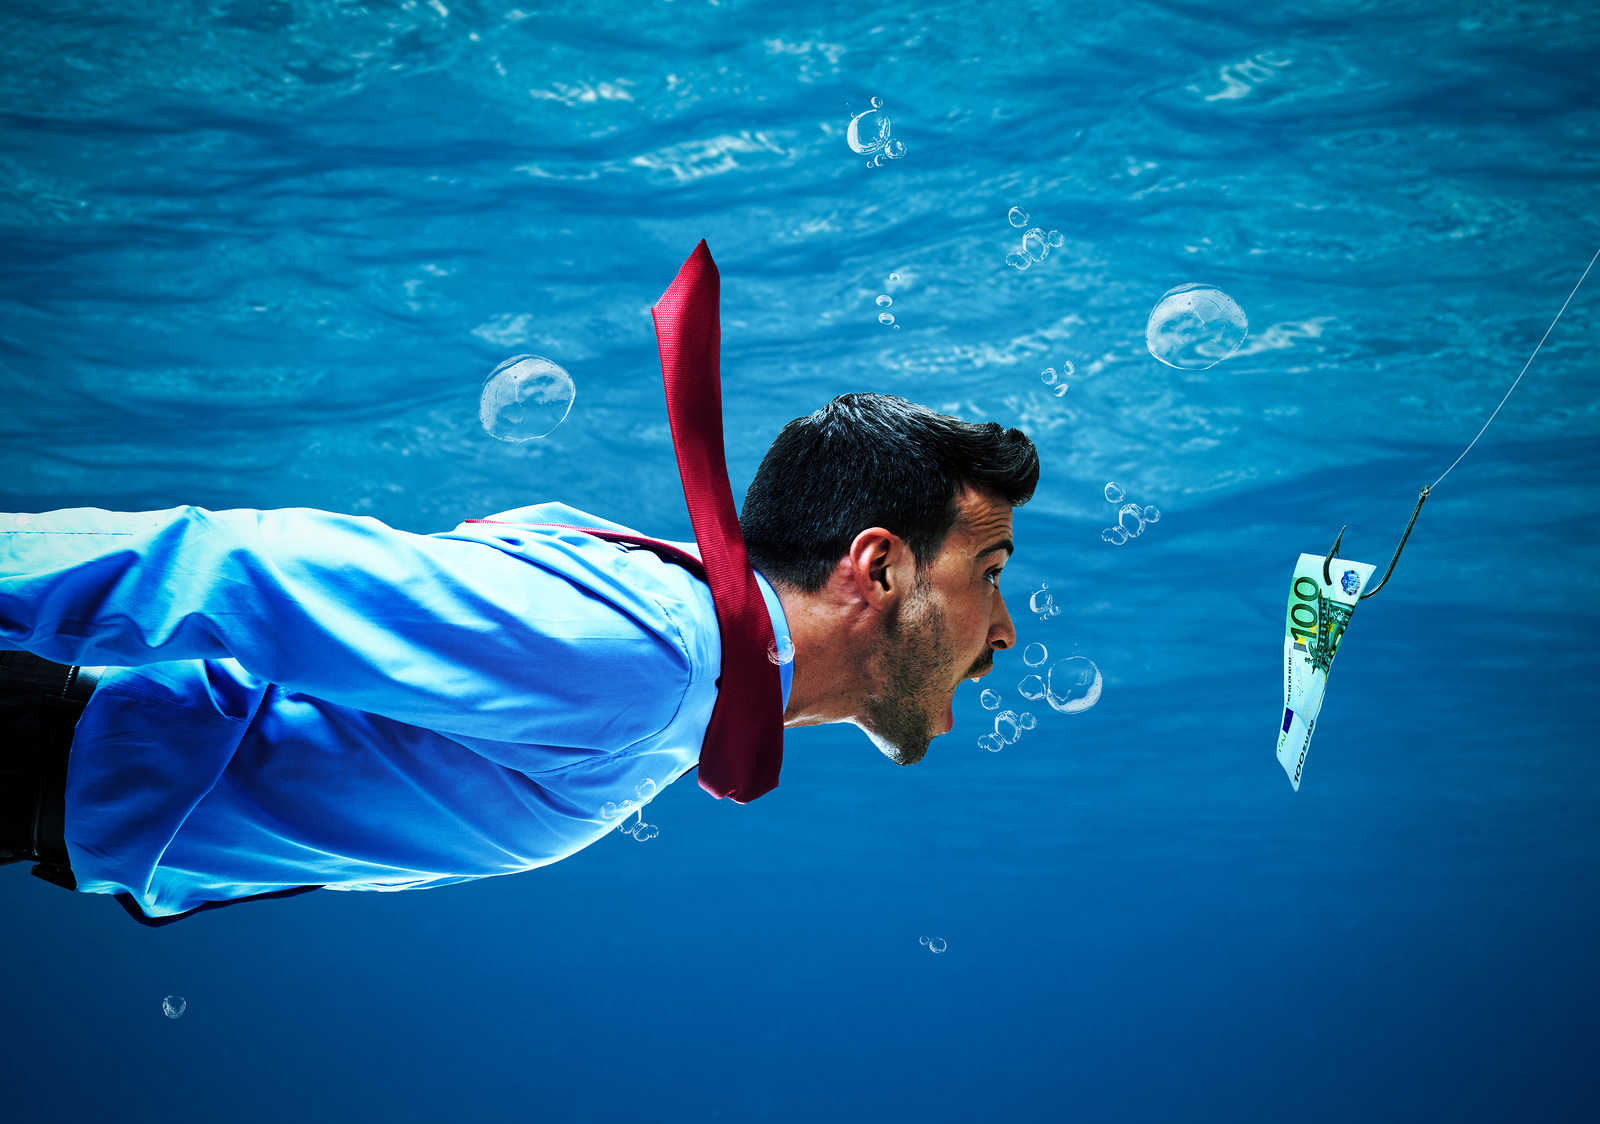 Underwater-scene-of-a-business-man-chasing-money-on-a-fishing-line